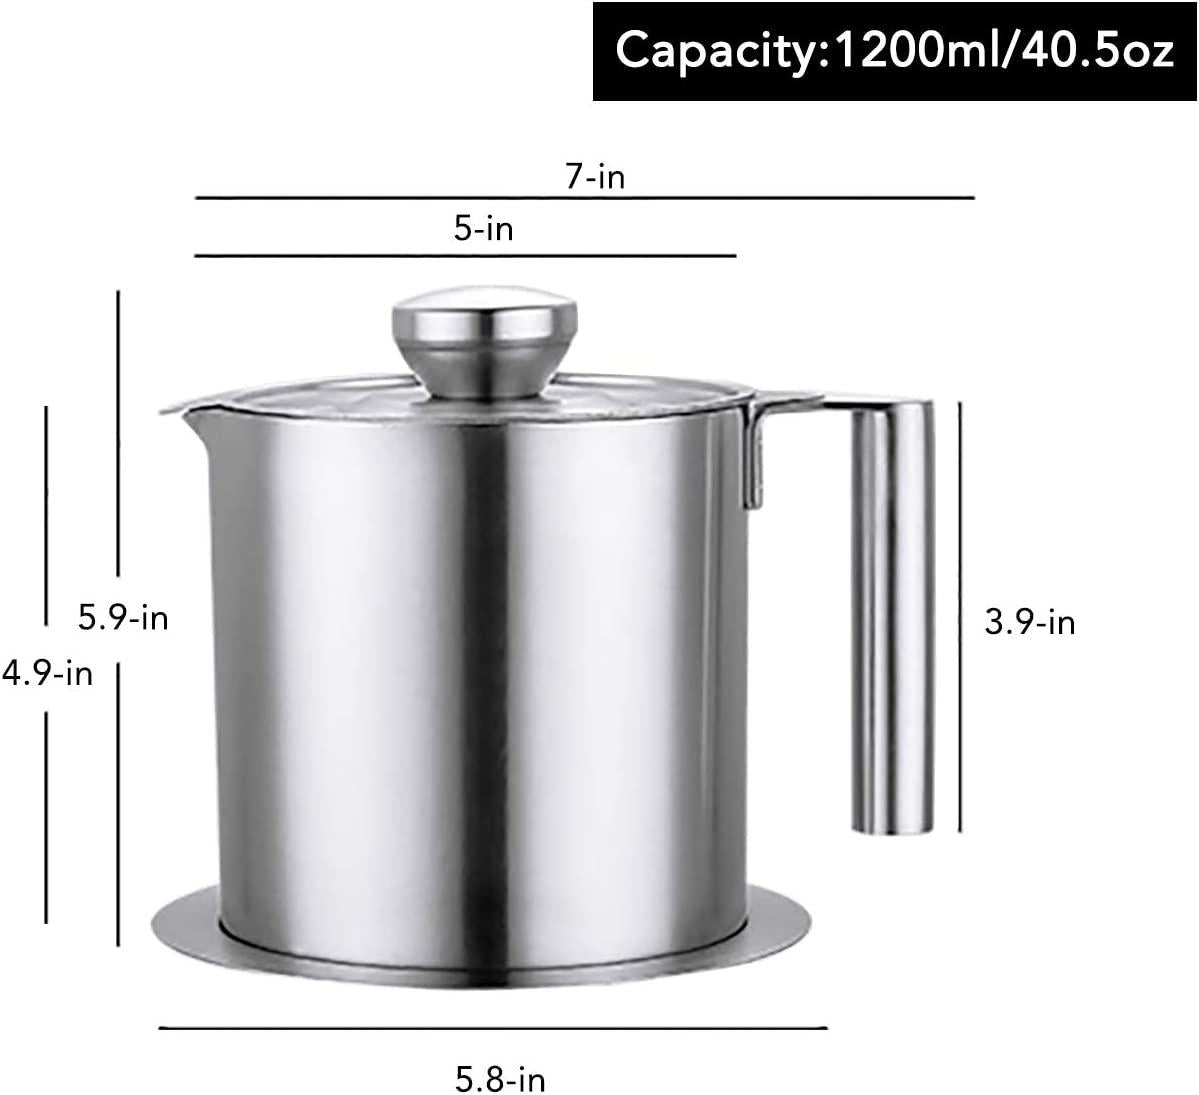 Eglaf, Eglaf 1.2L Stainless Steel Grease Strainer - Bacon Oil Container with Removable Filter - Dustproof Lid, Dripproof Base, Anti-scalding Handheld - Storage Can for Reusable Cooking Frying Oil, Fat